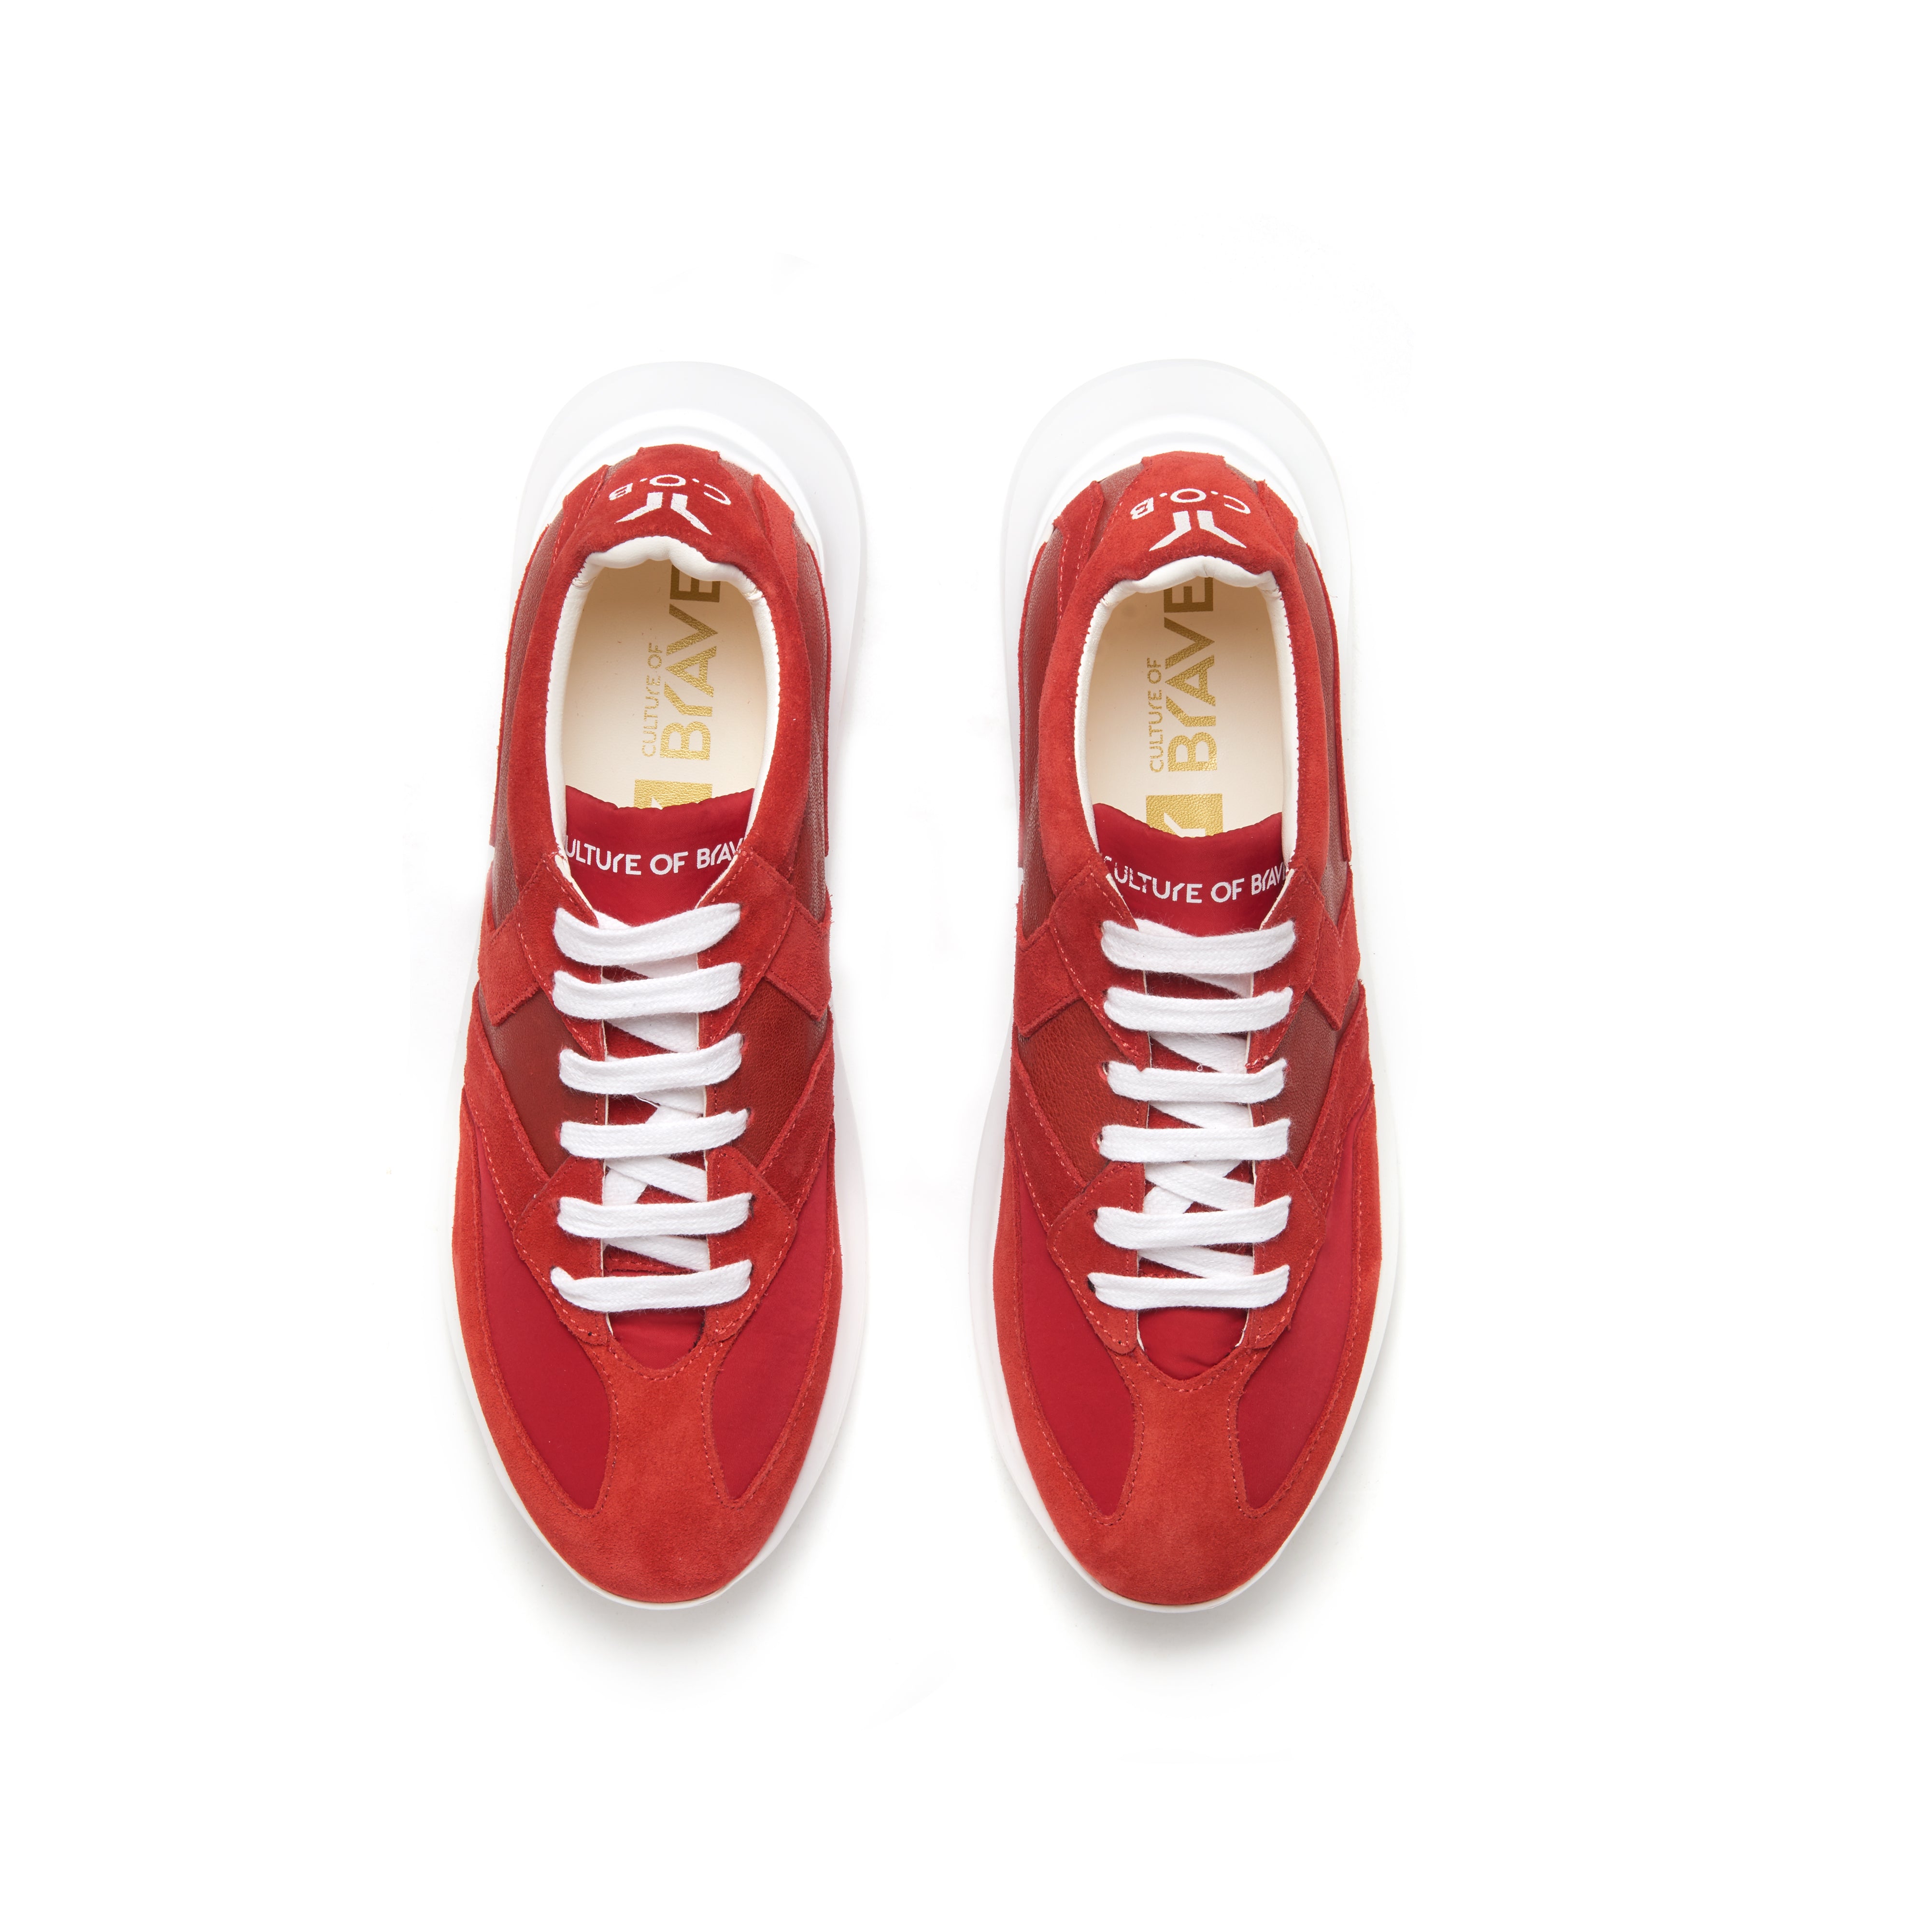 Free Soul_6 Men Red leather red wing low cut